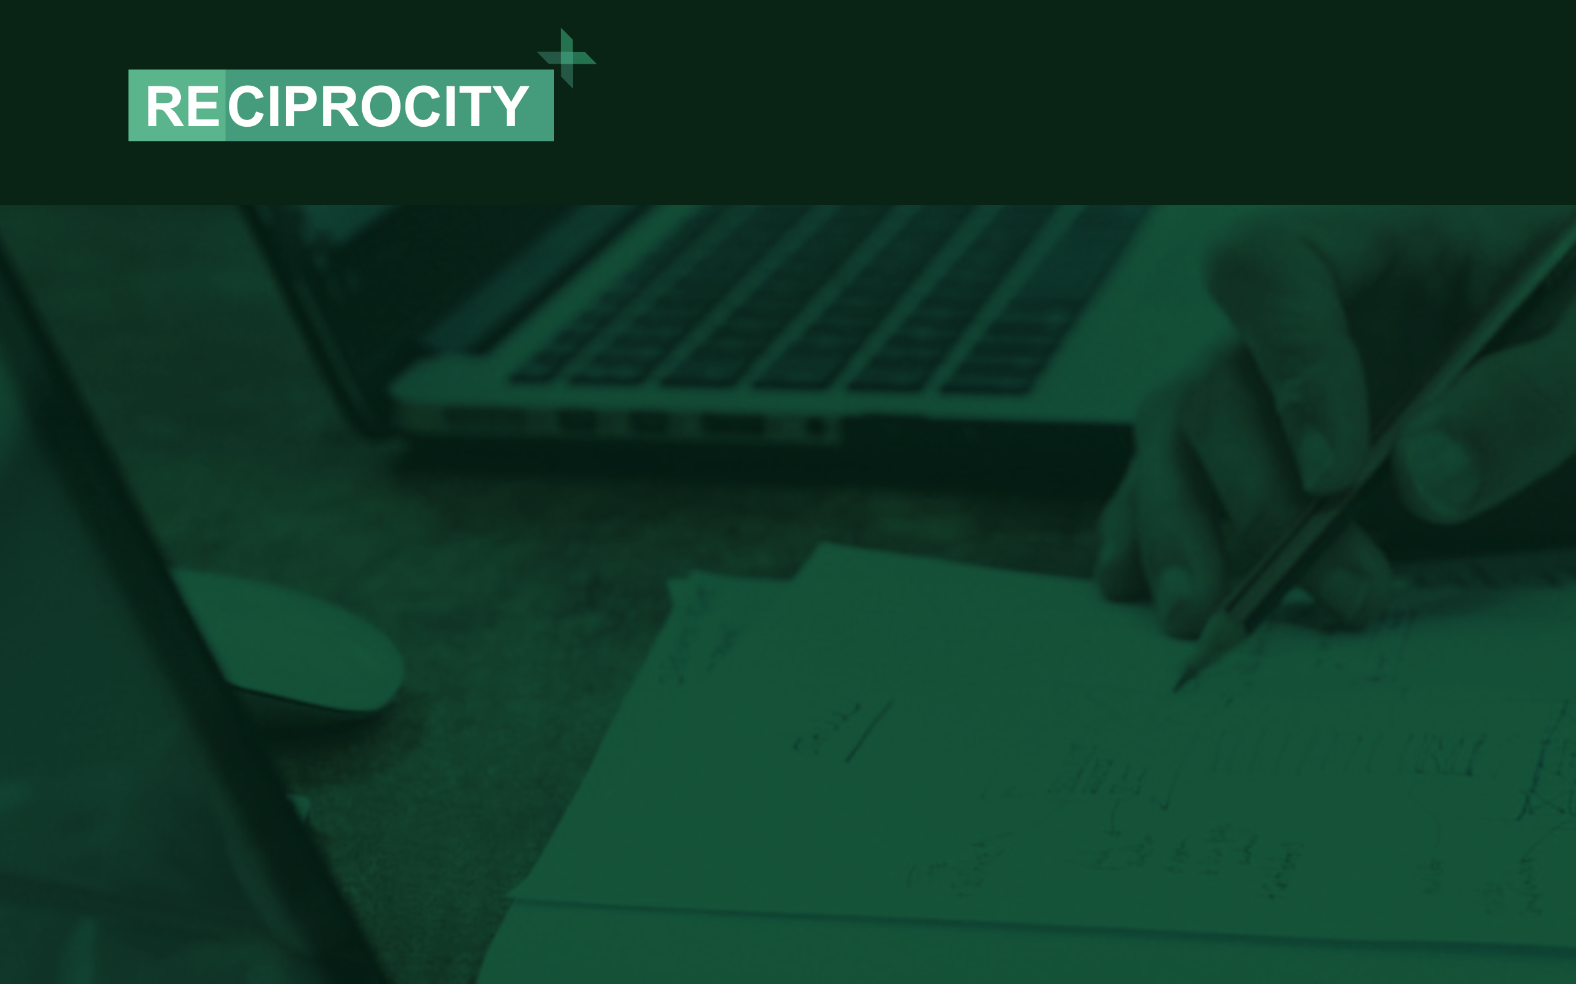 The RECIPROCITY project has launched a call for tender to select financial experts for mobility projects